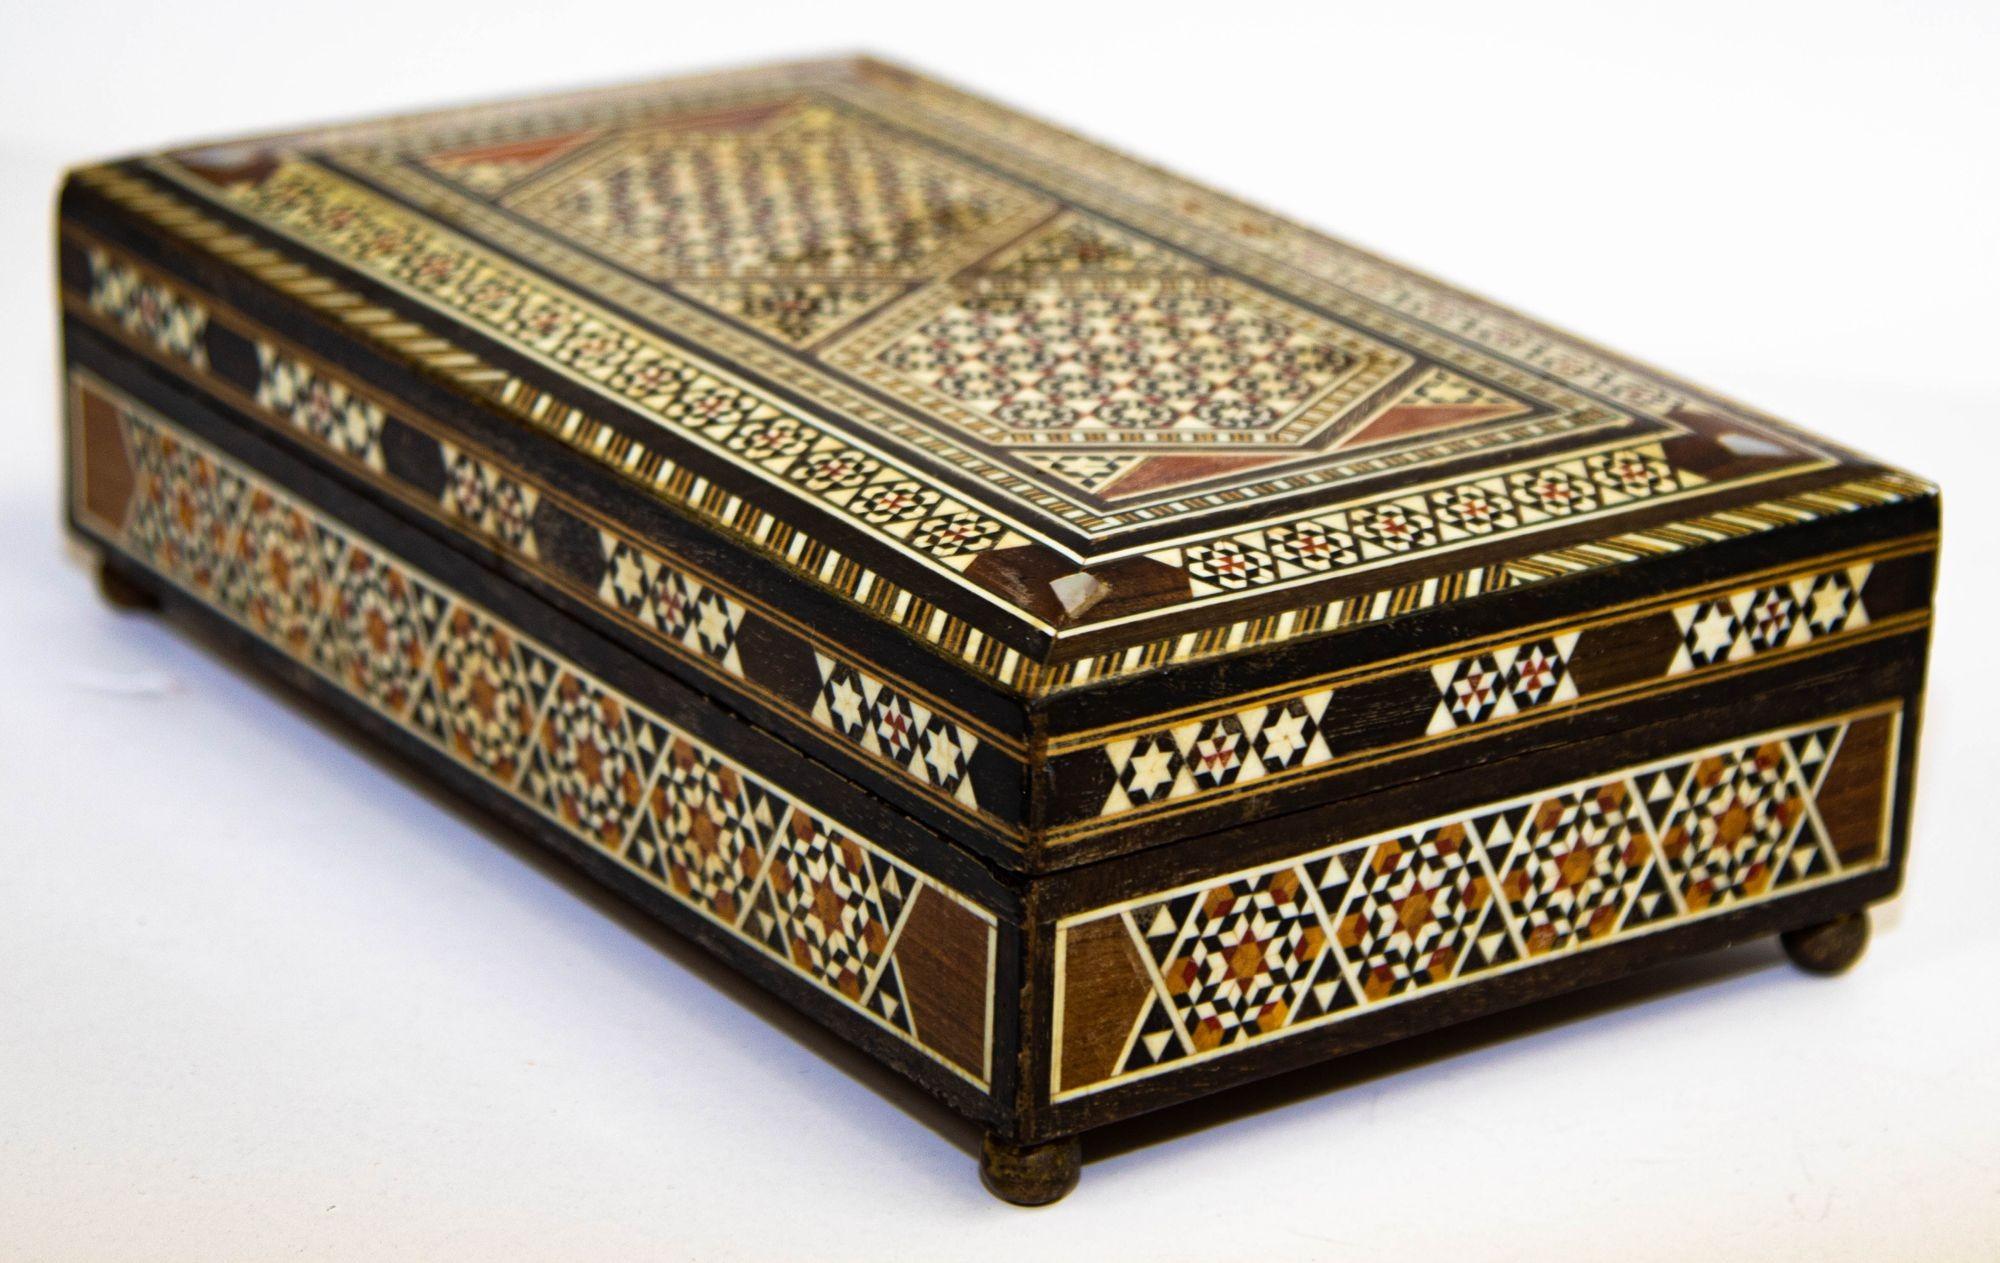 Spanish Inlaid Marquetry Jewelry Music Box.
Spanish inlaid Marquetry music box, cigarette box. Handcrafted in Spain in the Moorish Syrian style. Finely inlaid in Islamic Moorish geometric designs with ebony and bone and other precious wood. When you